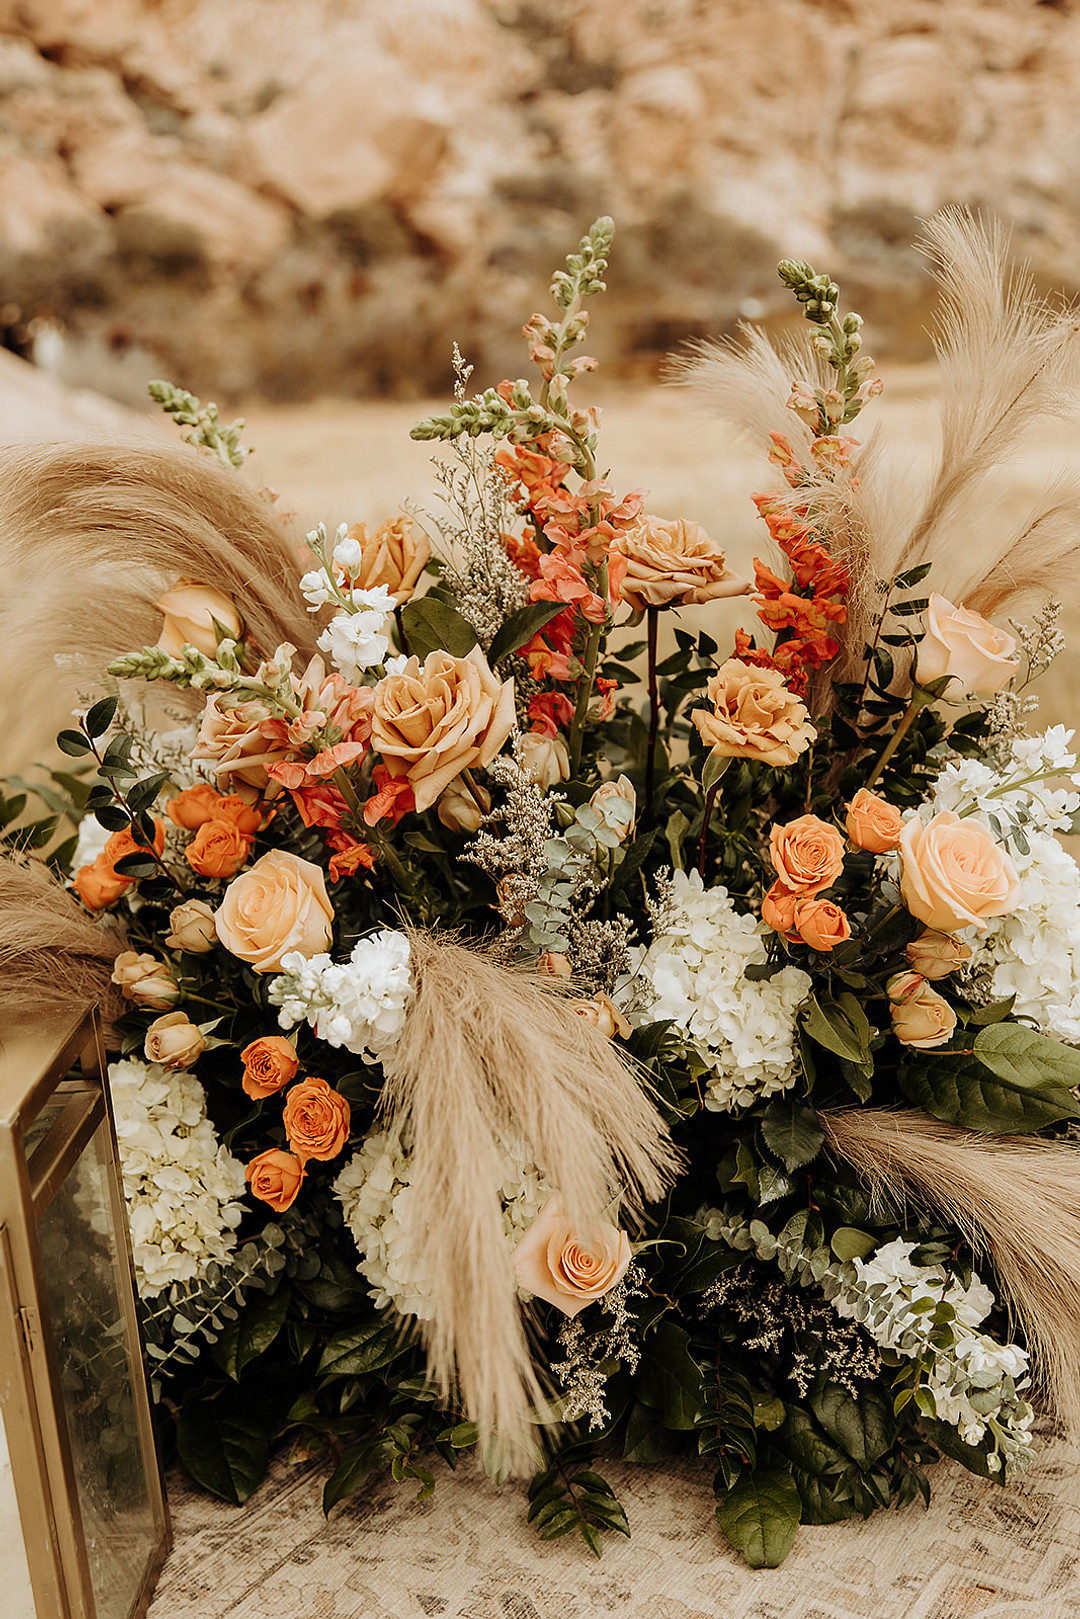 Floral arrangement of white and peach roses, coral orange gladiolas, orange leaves, eucalyptus leaves and pampas grass for an outdoor wedding in a desert.